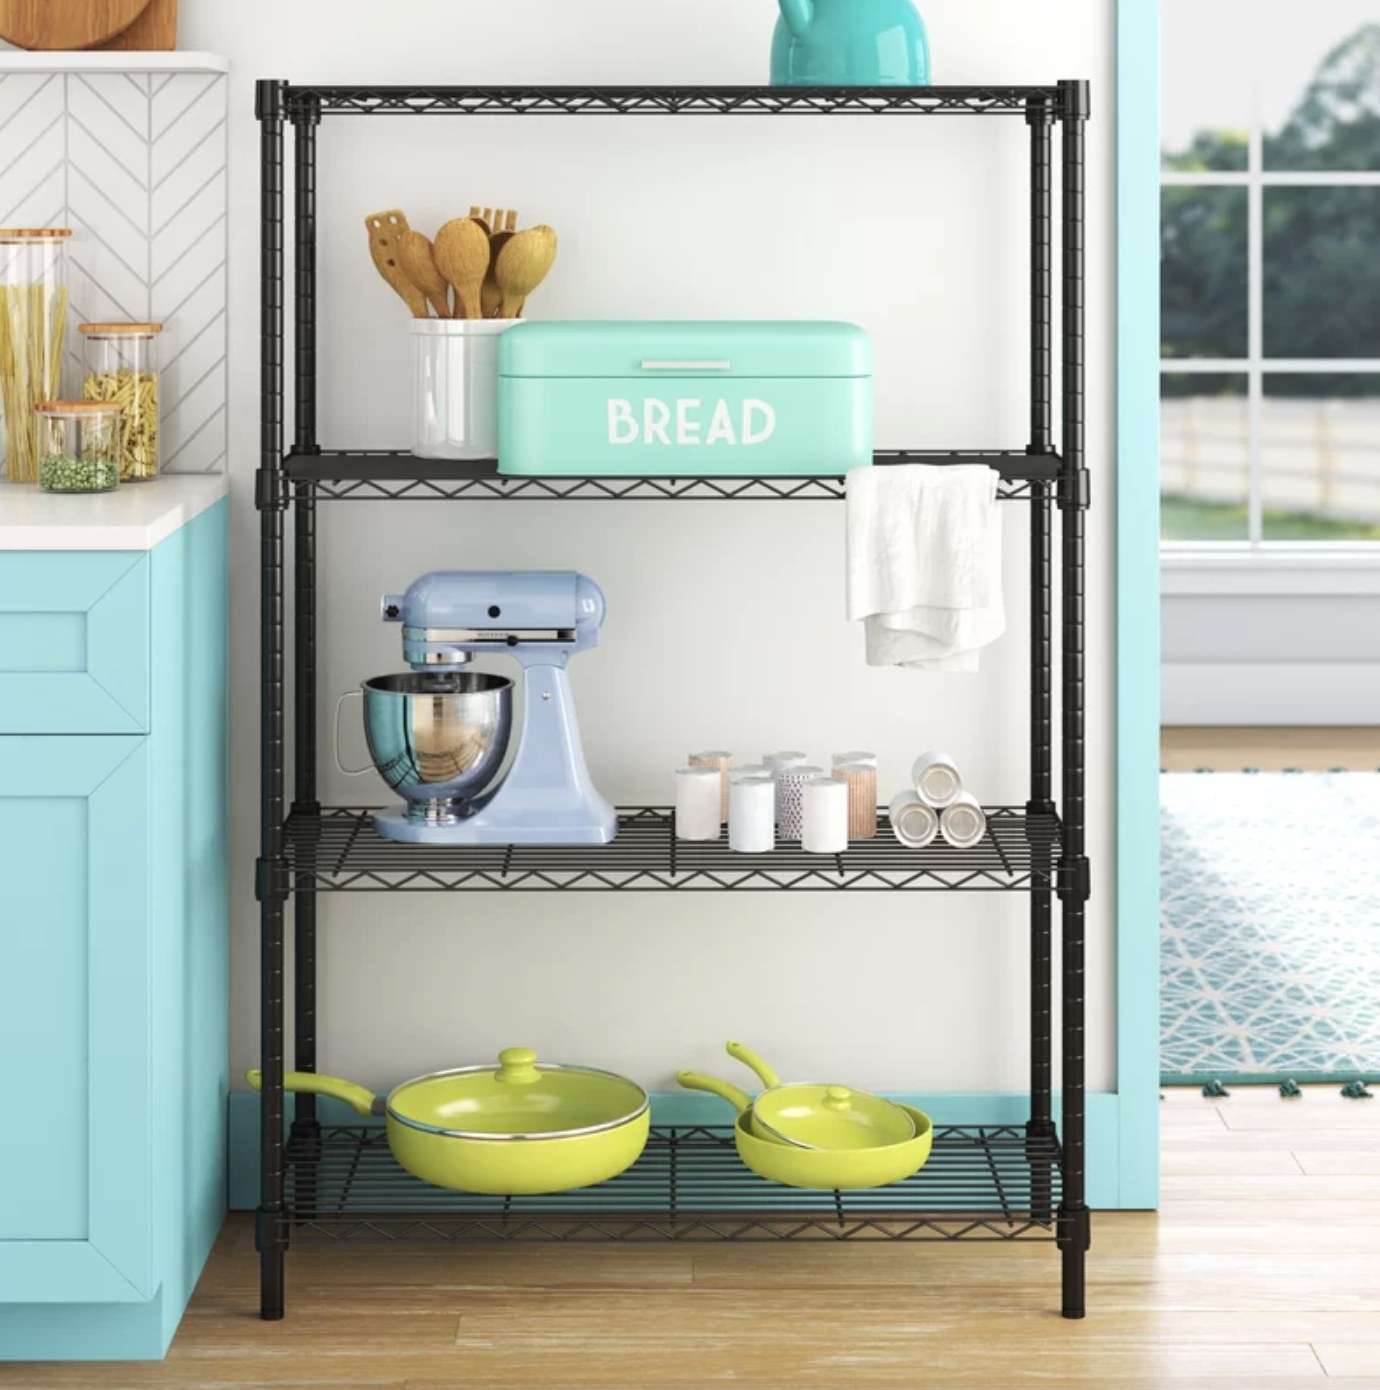 The black wire shelving unit is in a kitchen and is holding pastel-colored items such as pots and other kitchen tools